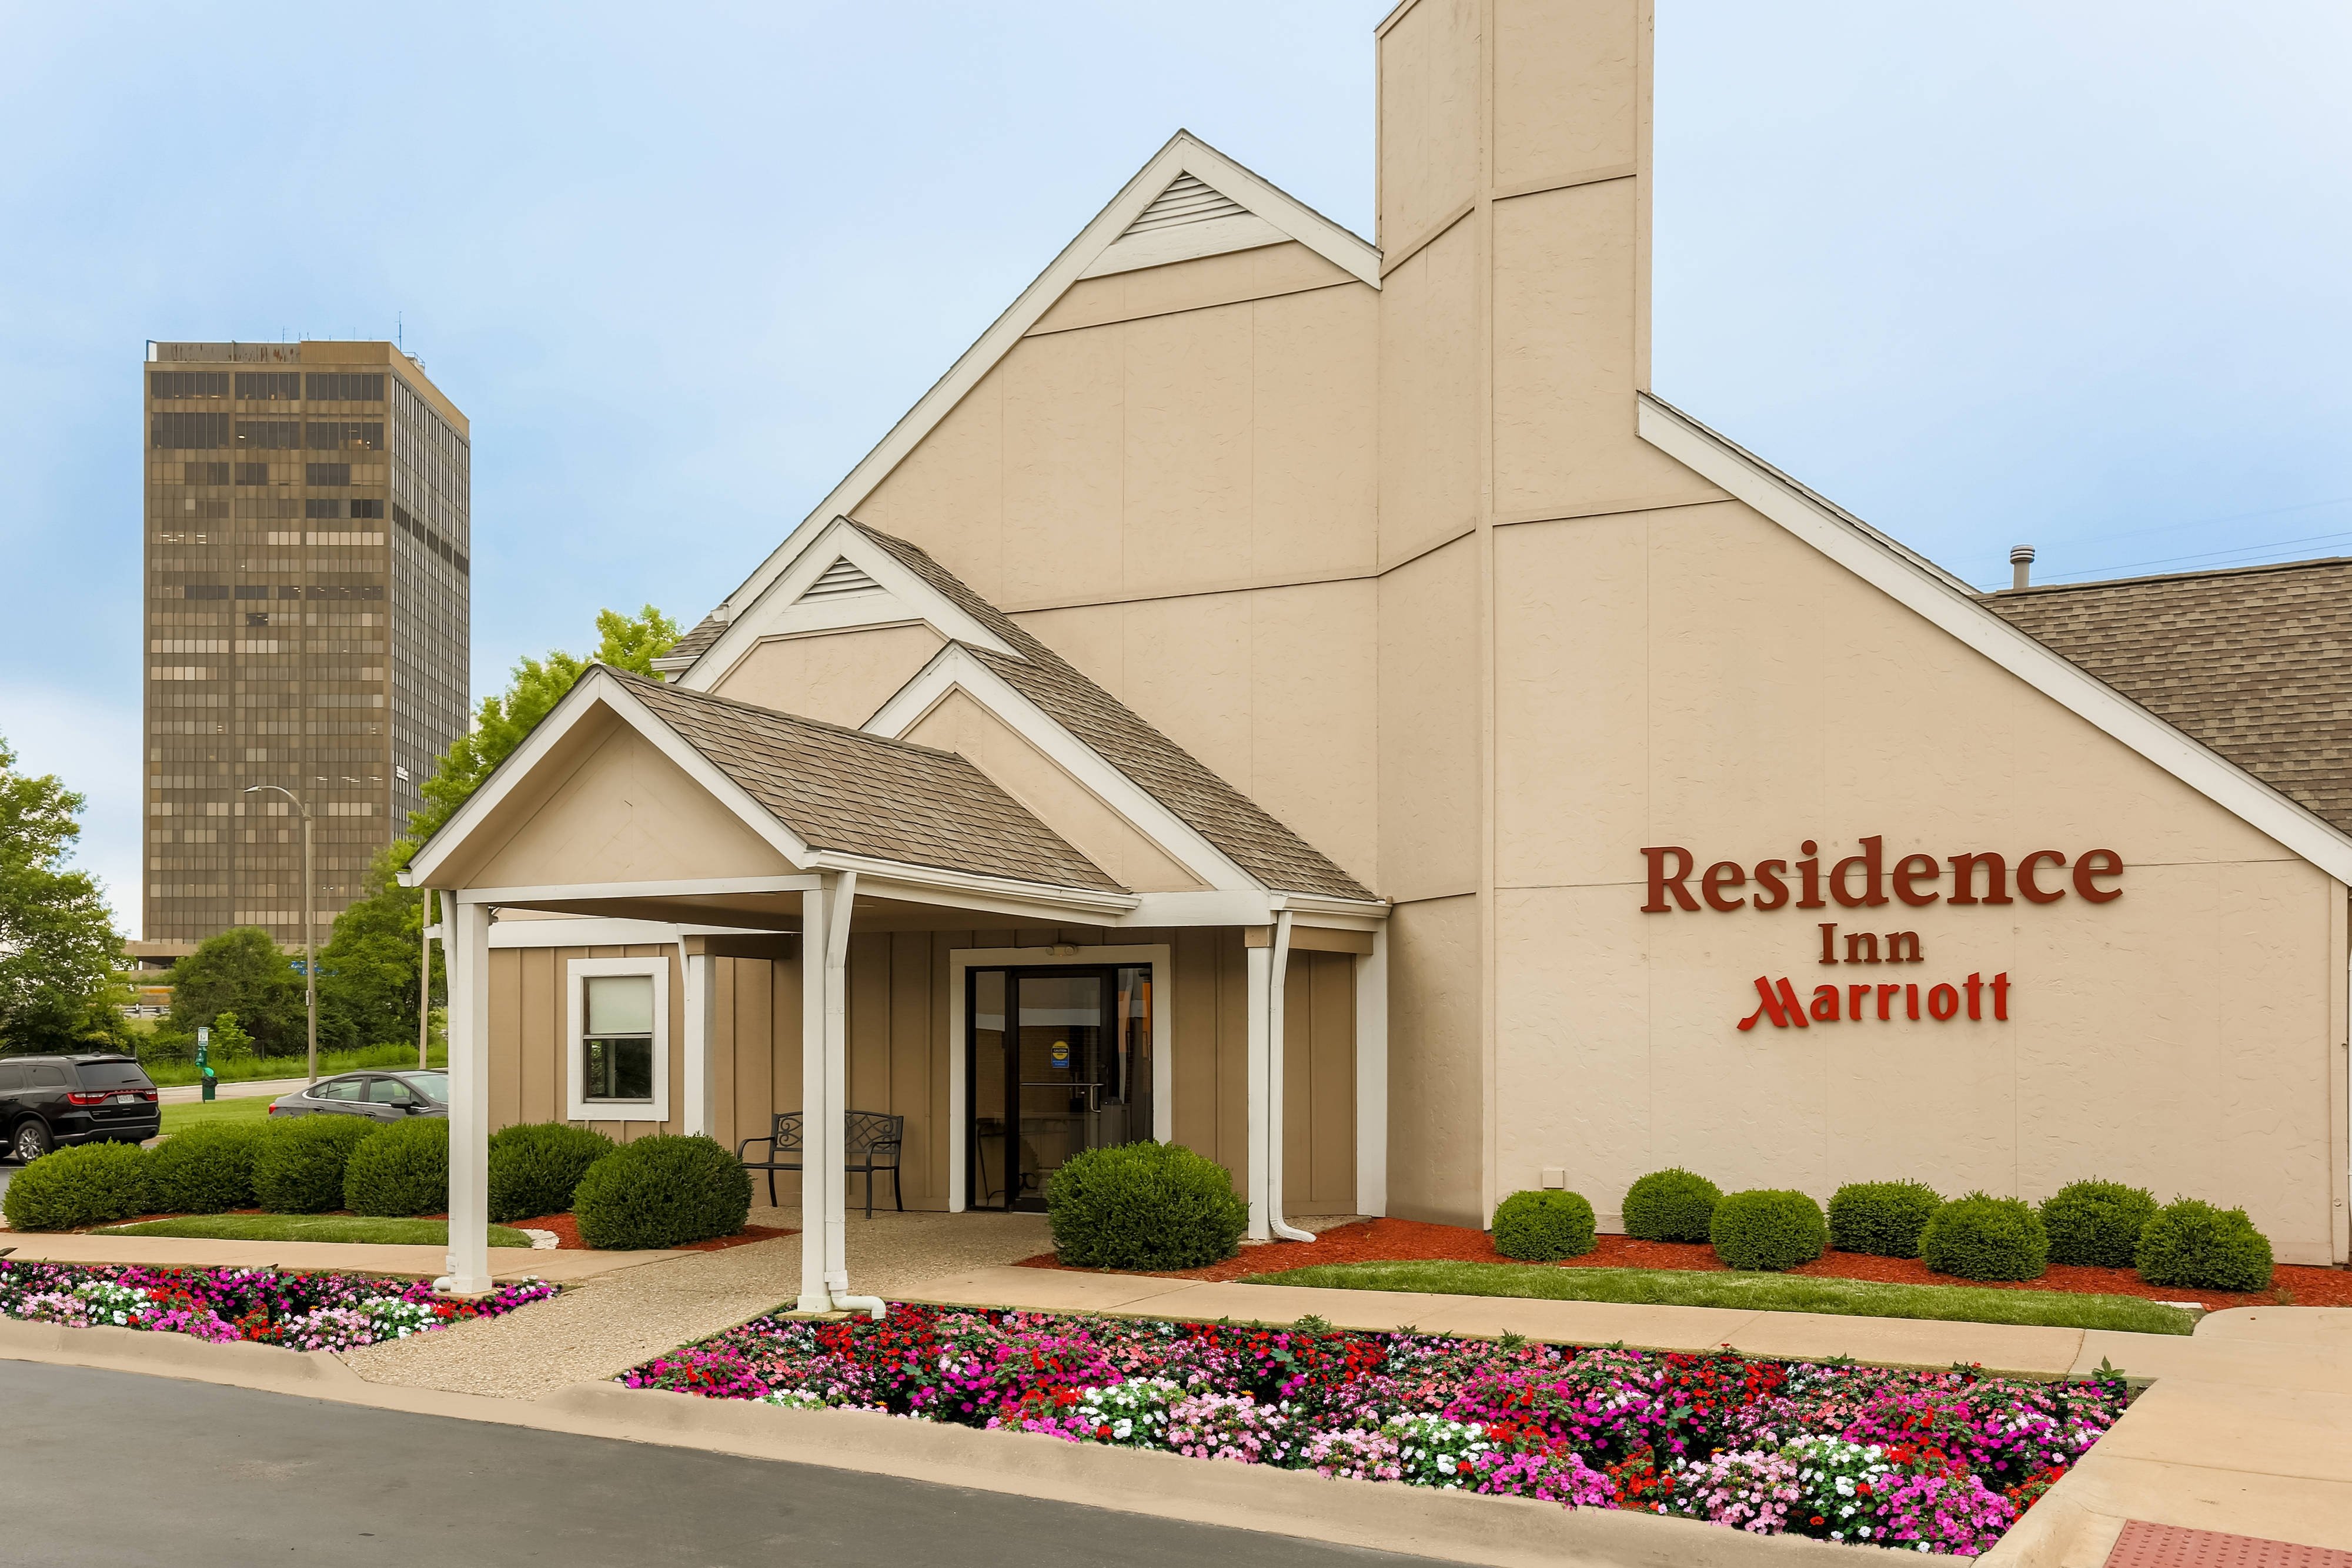 Residence Inn Marriott Galleria Meetings and Events- First Class St Louis, MO Hotels | TravelAge ...